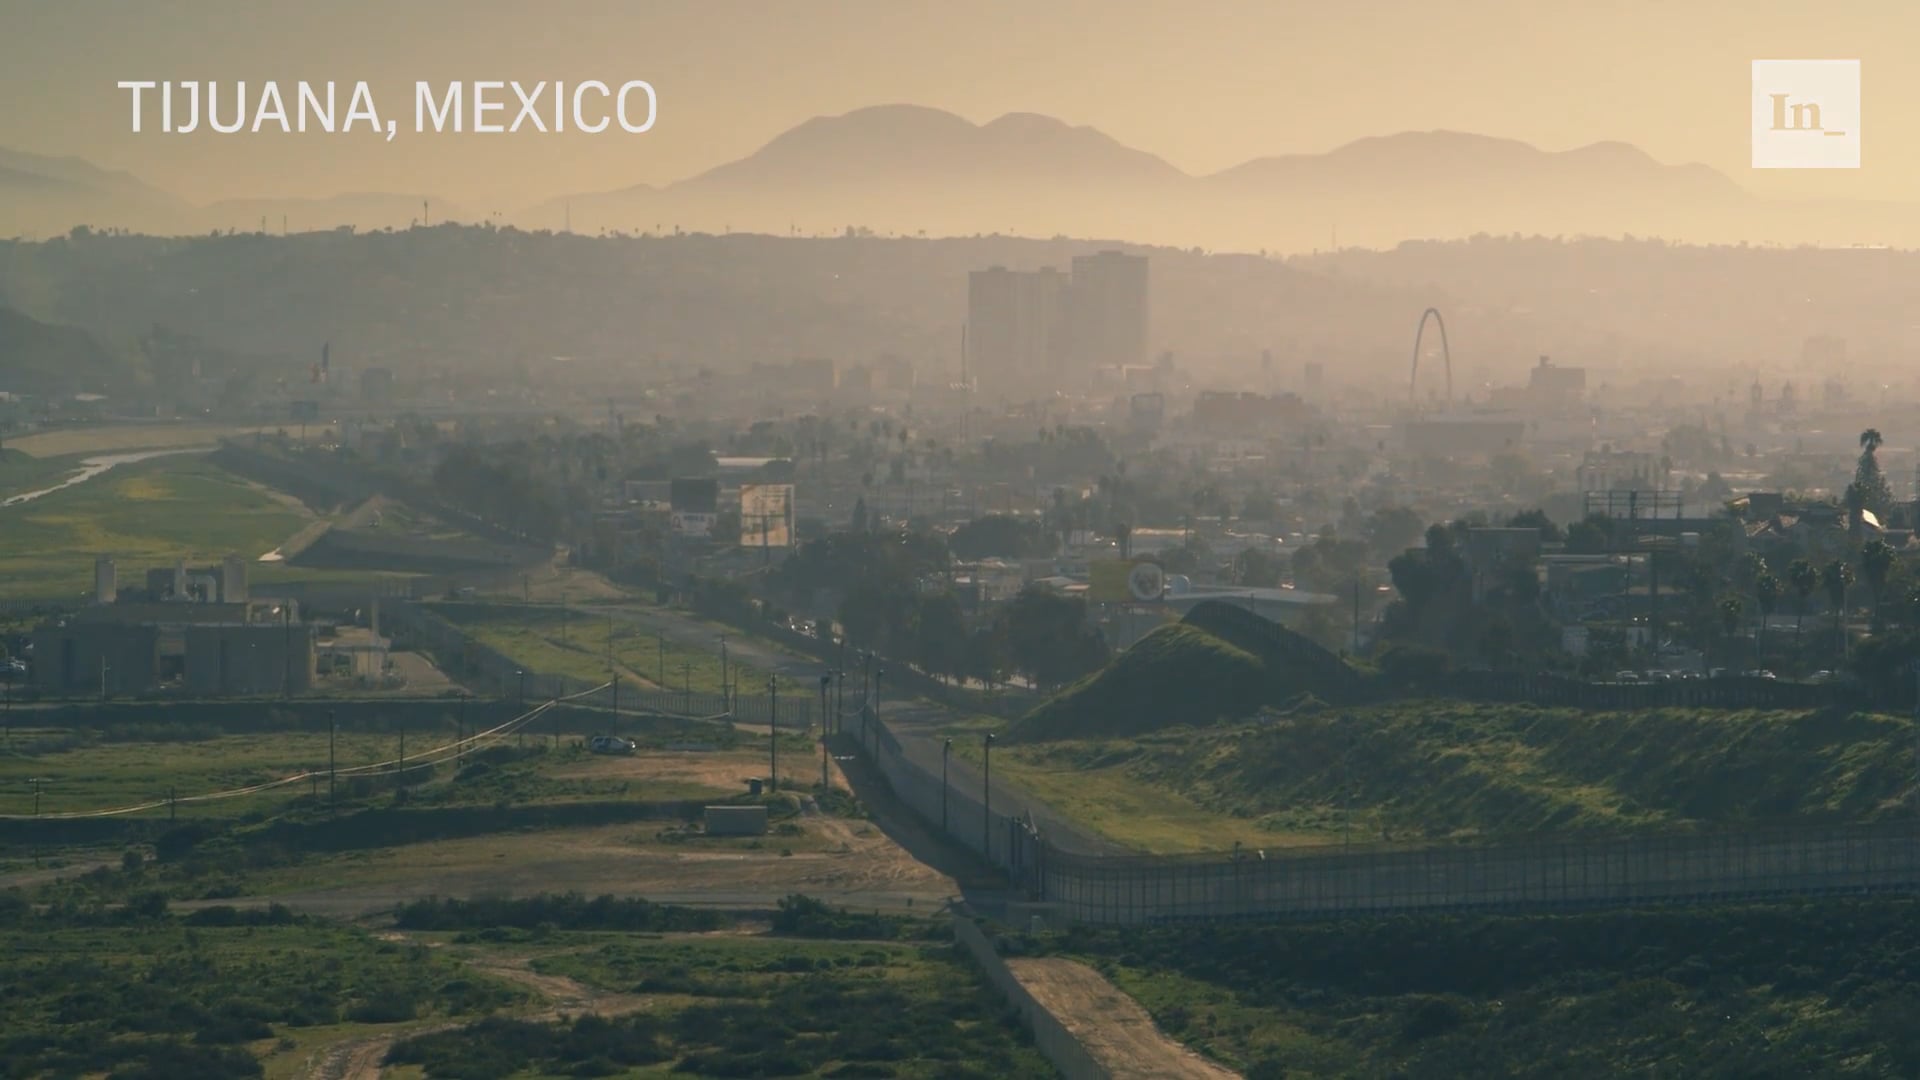 Tijuana is a Hub of Exile and Hope for Deportees and Migrants